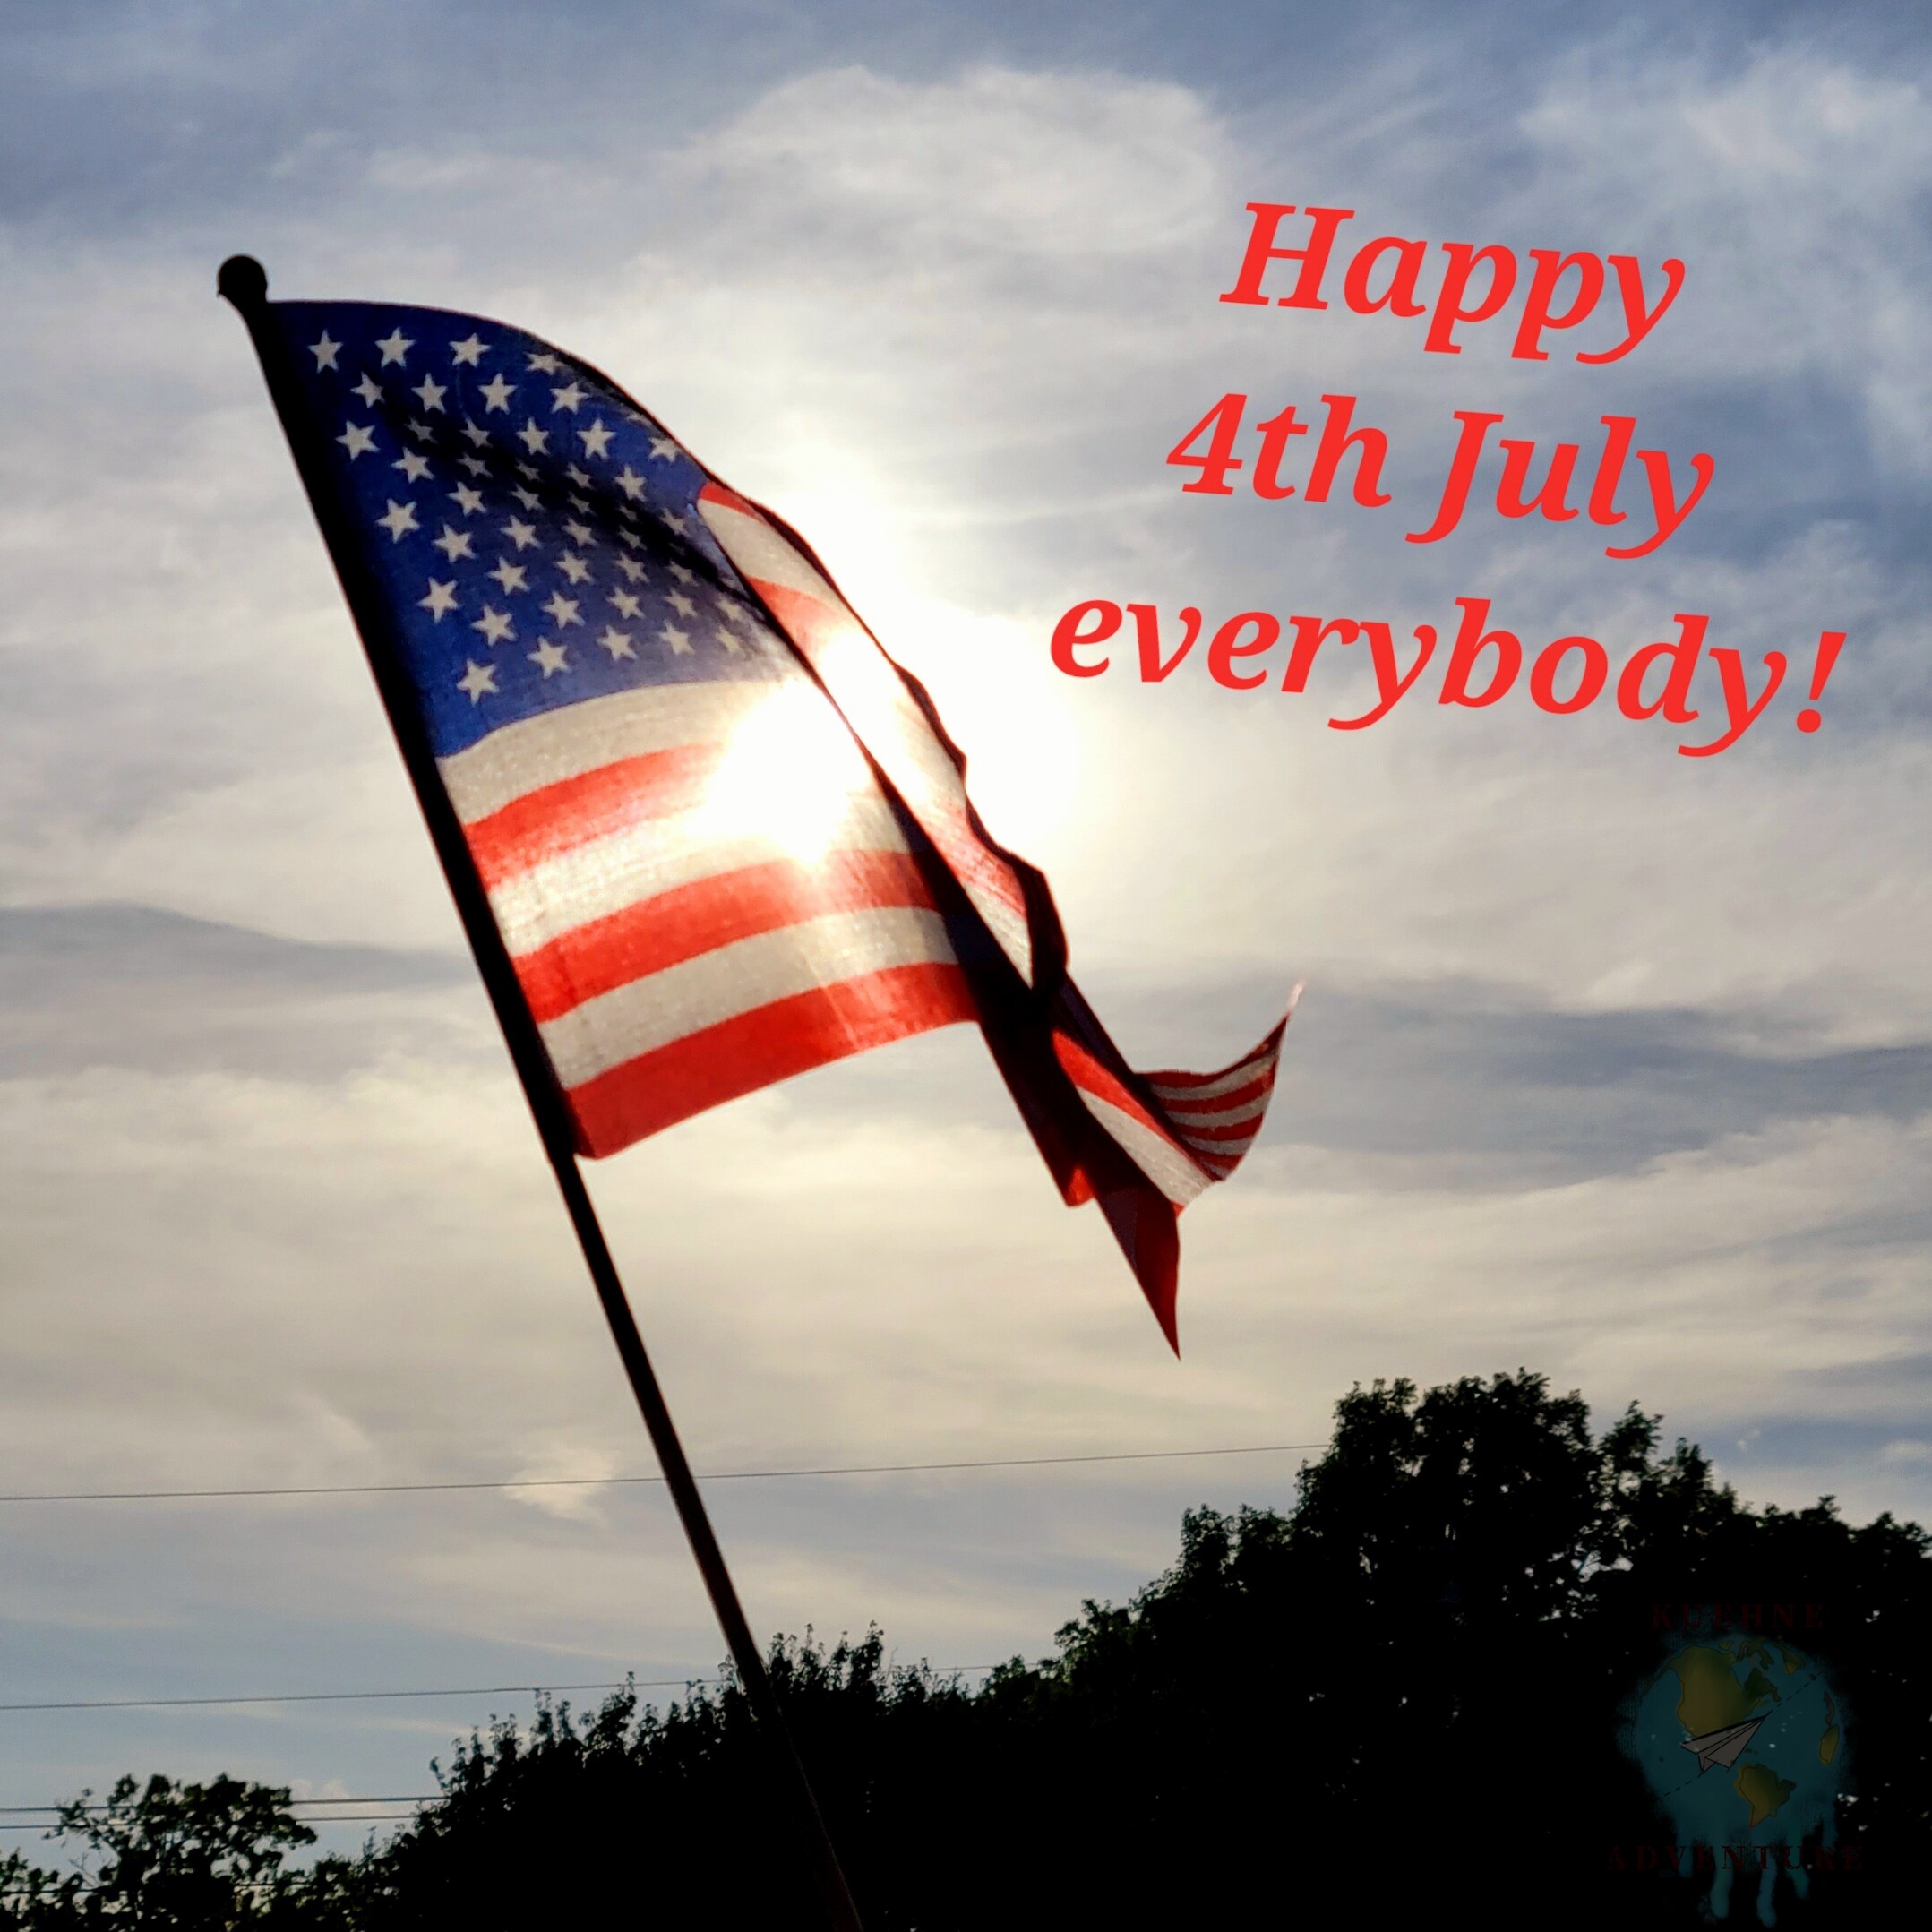 For the 4th time – 4th July